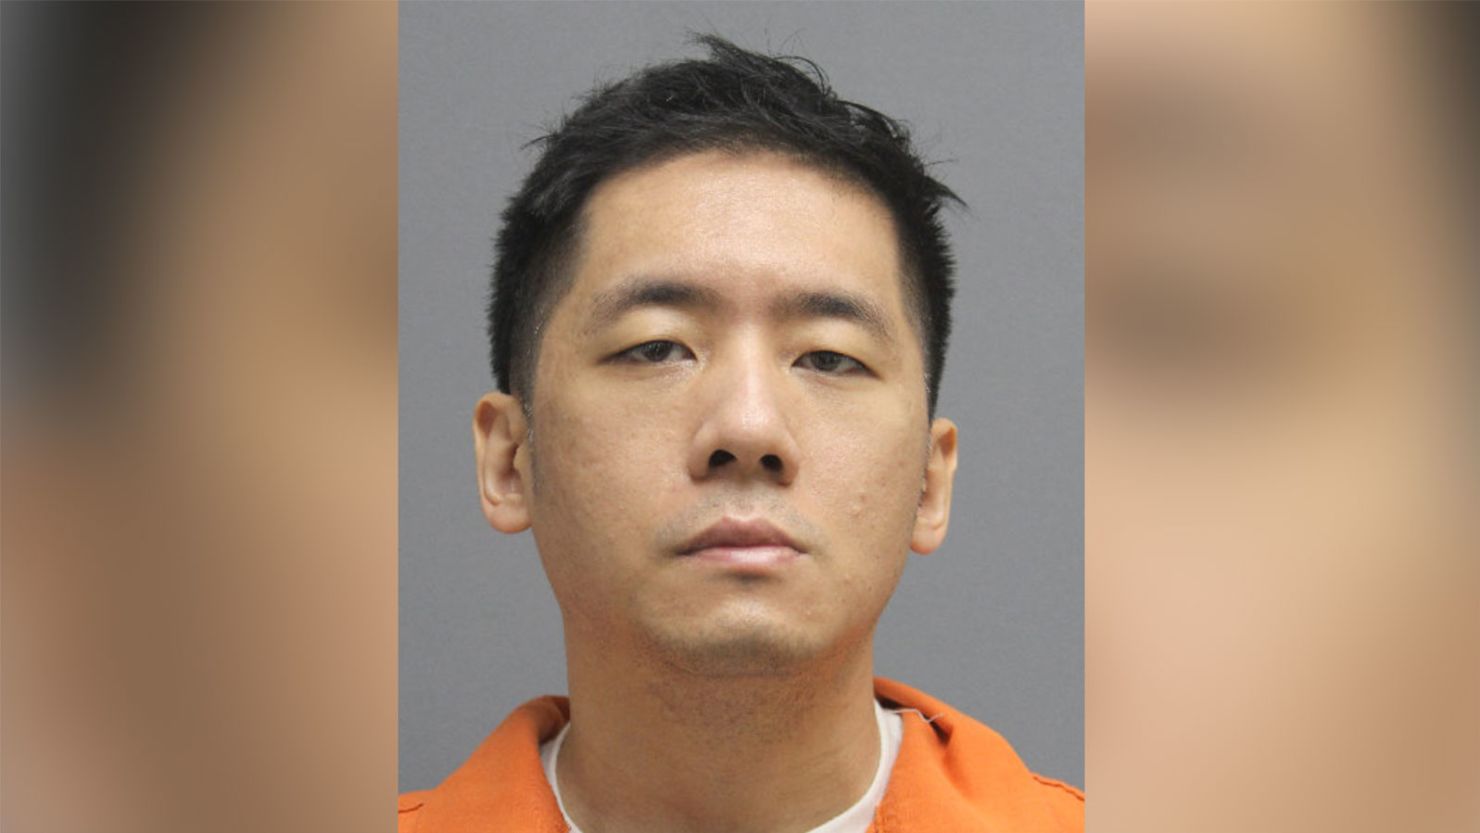 Rui Jiang was arrested at a Virginia church on Sunday, police said.